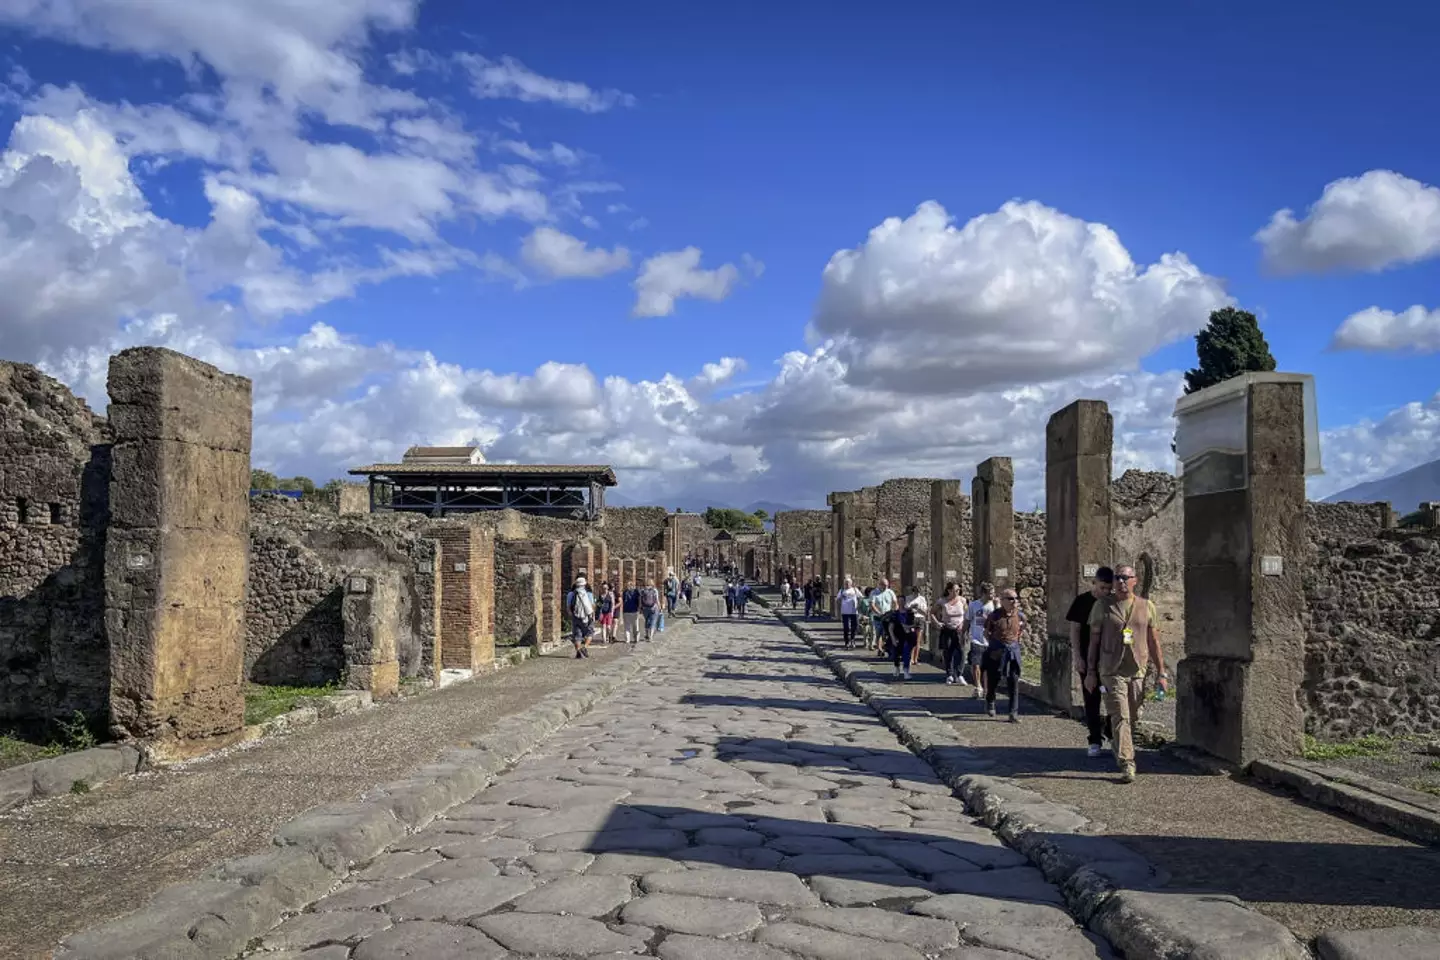 Pompeii is a site of enormous archaeological significance.